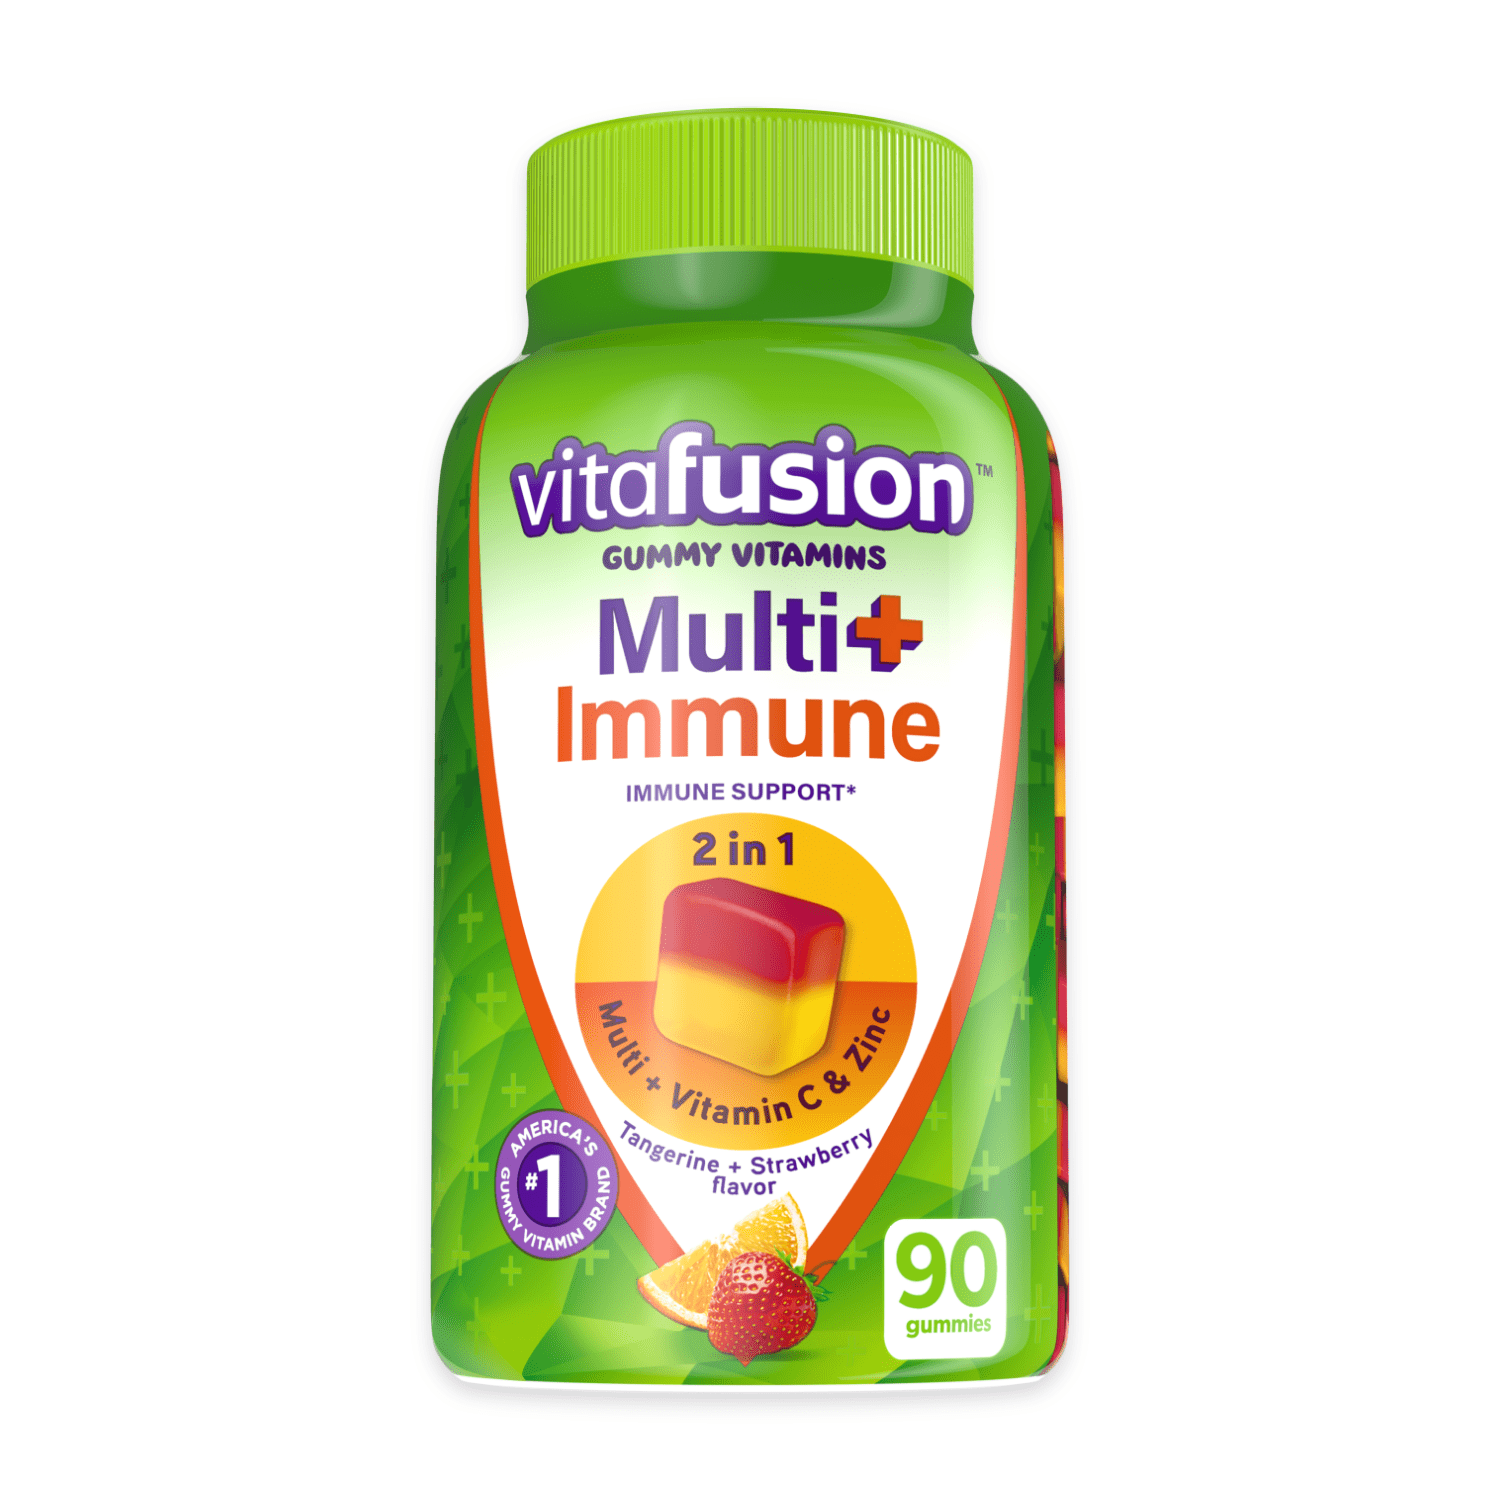 Vitafusion Multi+ Immune Support*  2-in-1 Benefits & Flavors  Adult Gummy Vitamins with Vitamin C, Zinc, Daily Multivitamins, 90 Count